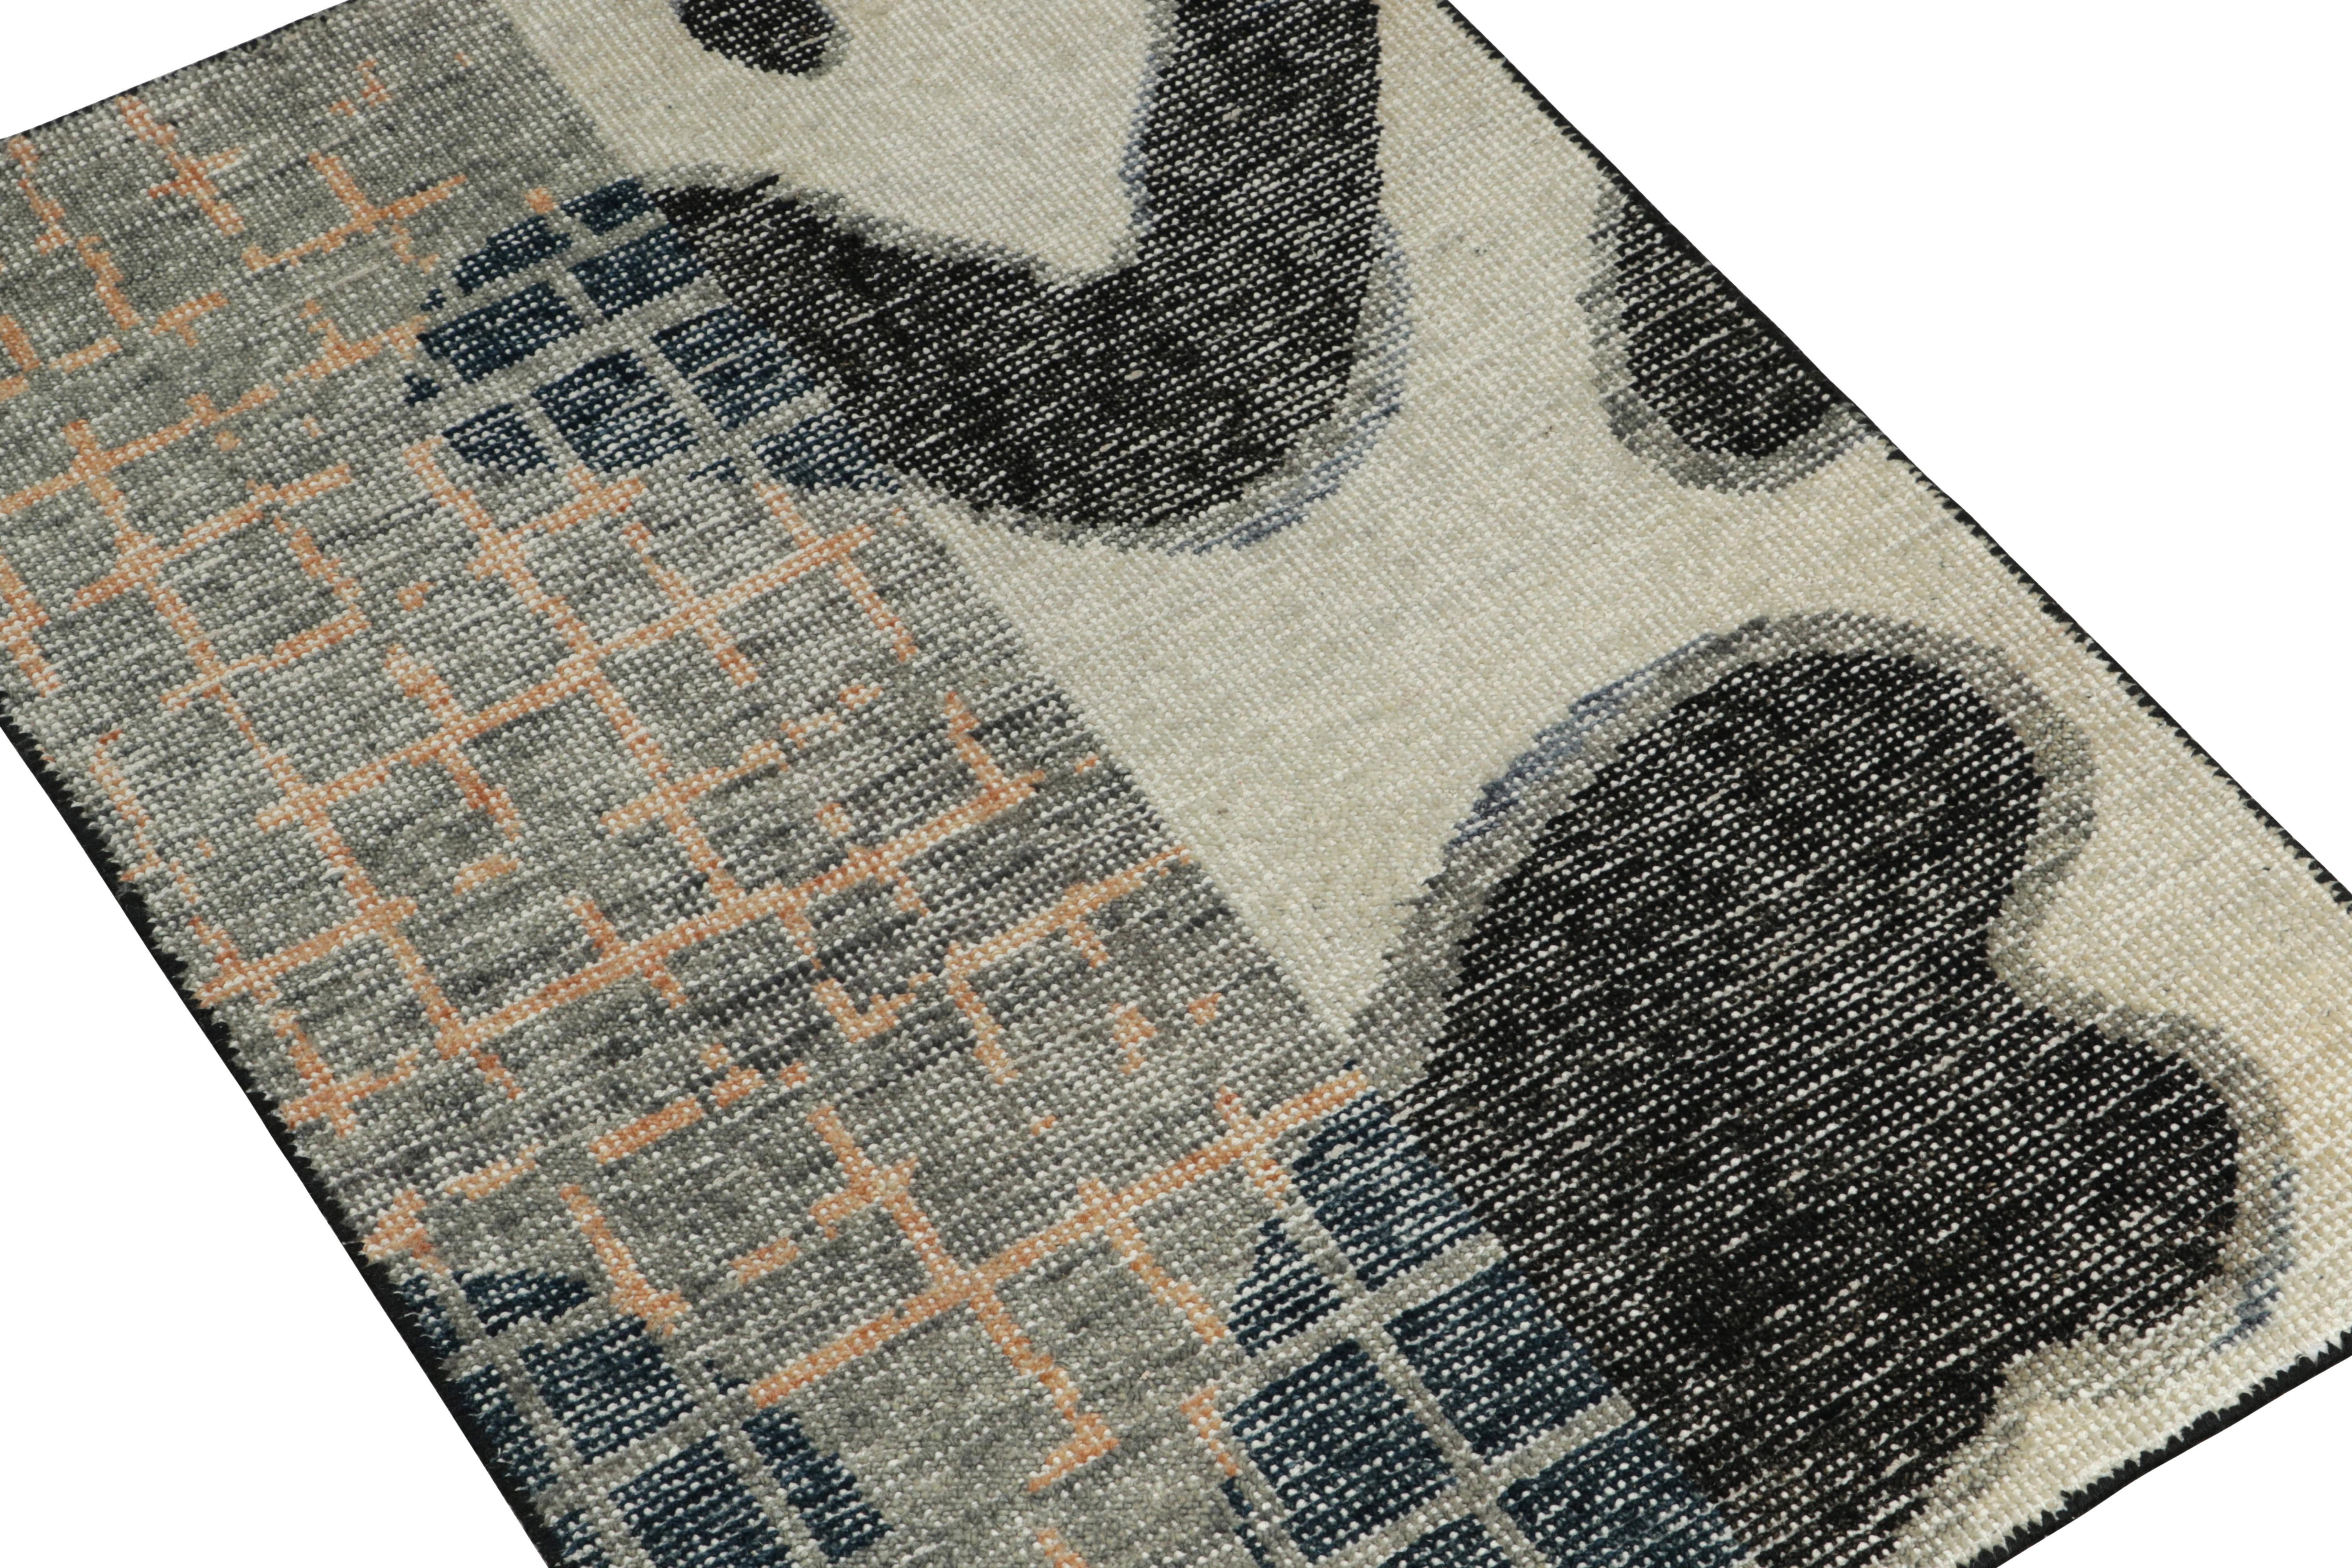 This 2x3 rug hails from the gift-size selections of Rug & Kilim’s Homage Collection, remarking a bold take on distressed style. This design evokes abstract moods with expressionist geometry in black, white, gray and blue.

An ideal choice in